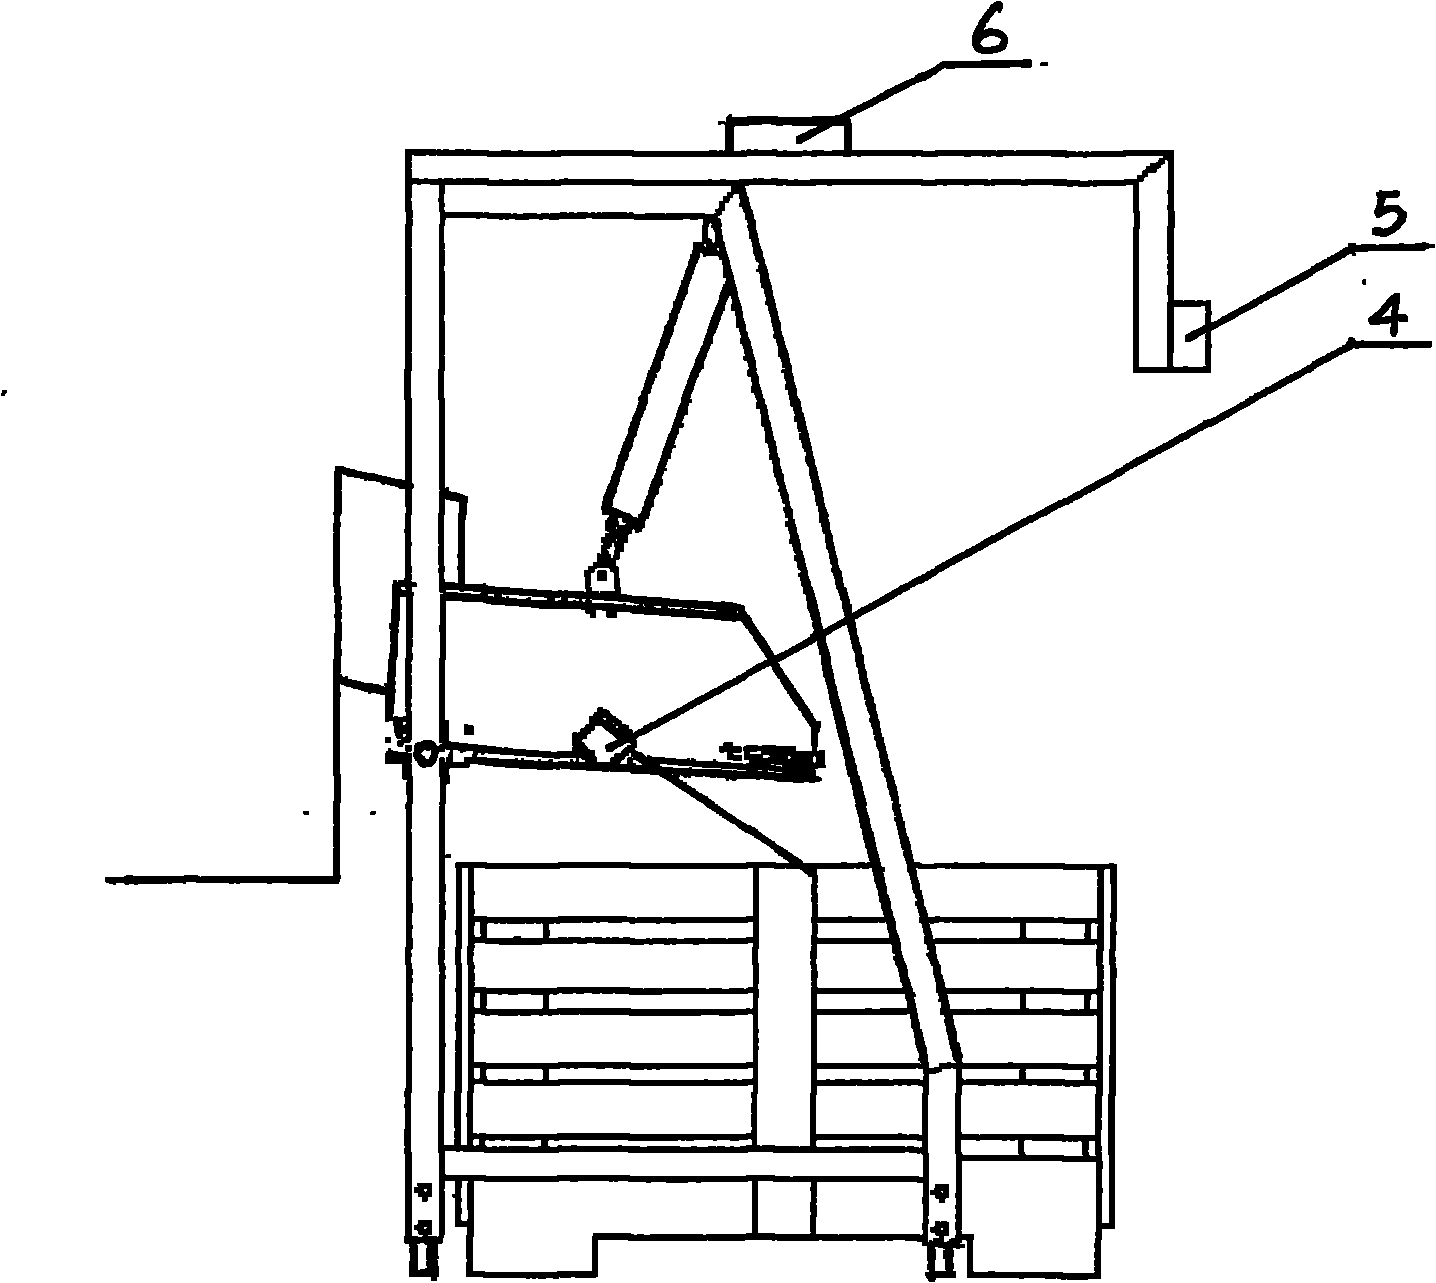 Gently and slowly loading and unloading device for sorted fruits